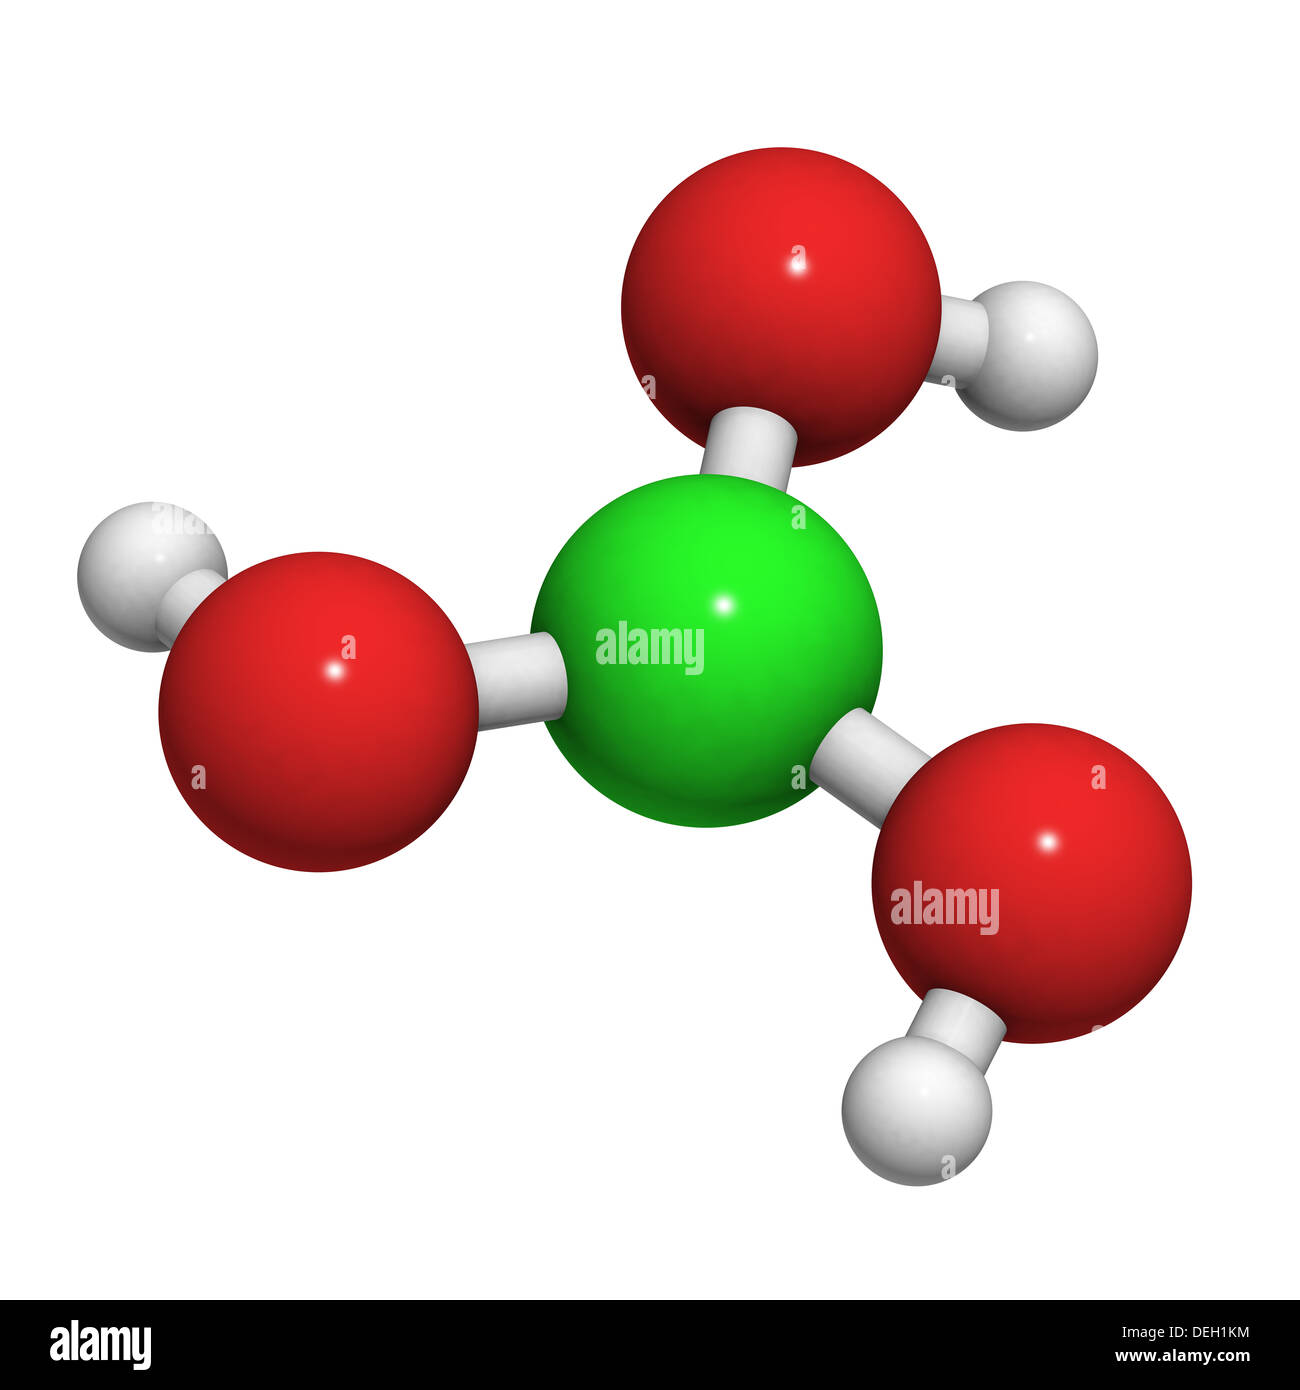 Boric acid molecule, chemical structure. Boric acid acts as an antiseptic, insecticide and flame retardant. Stock Photo